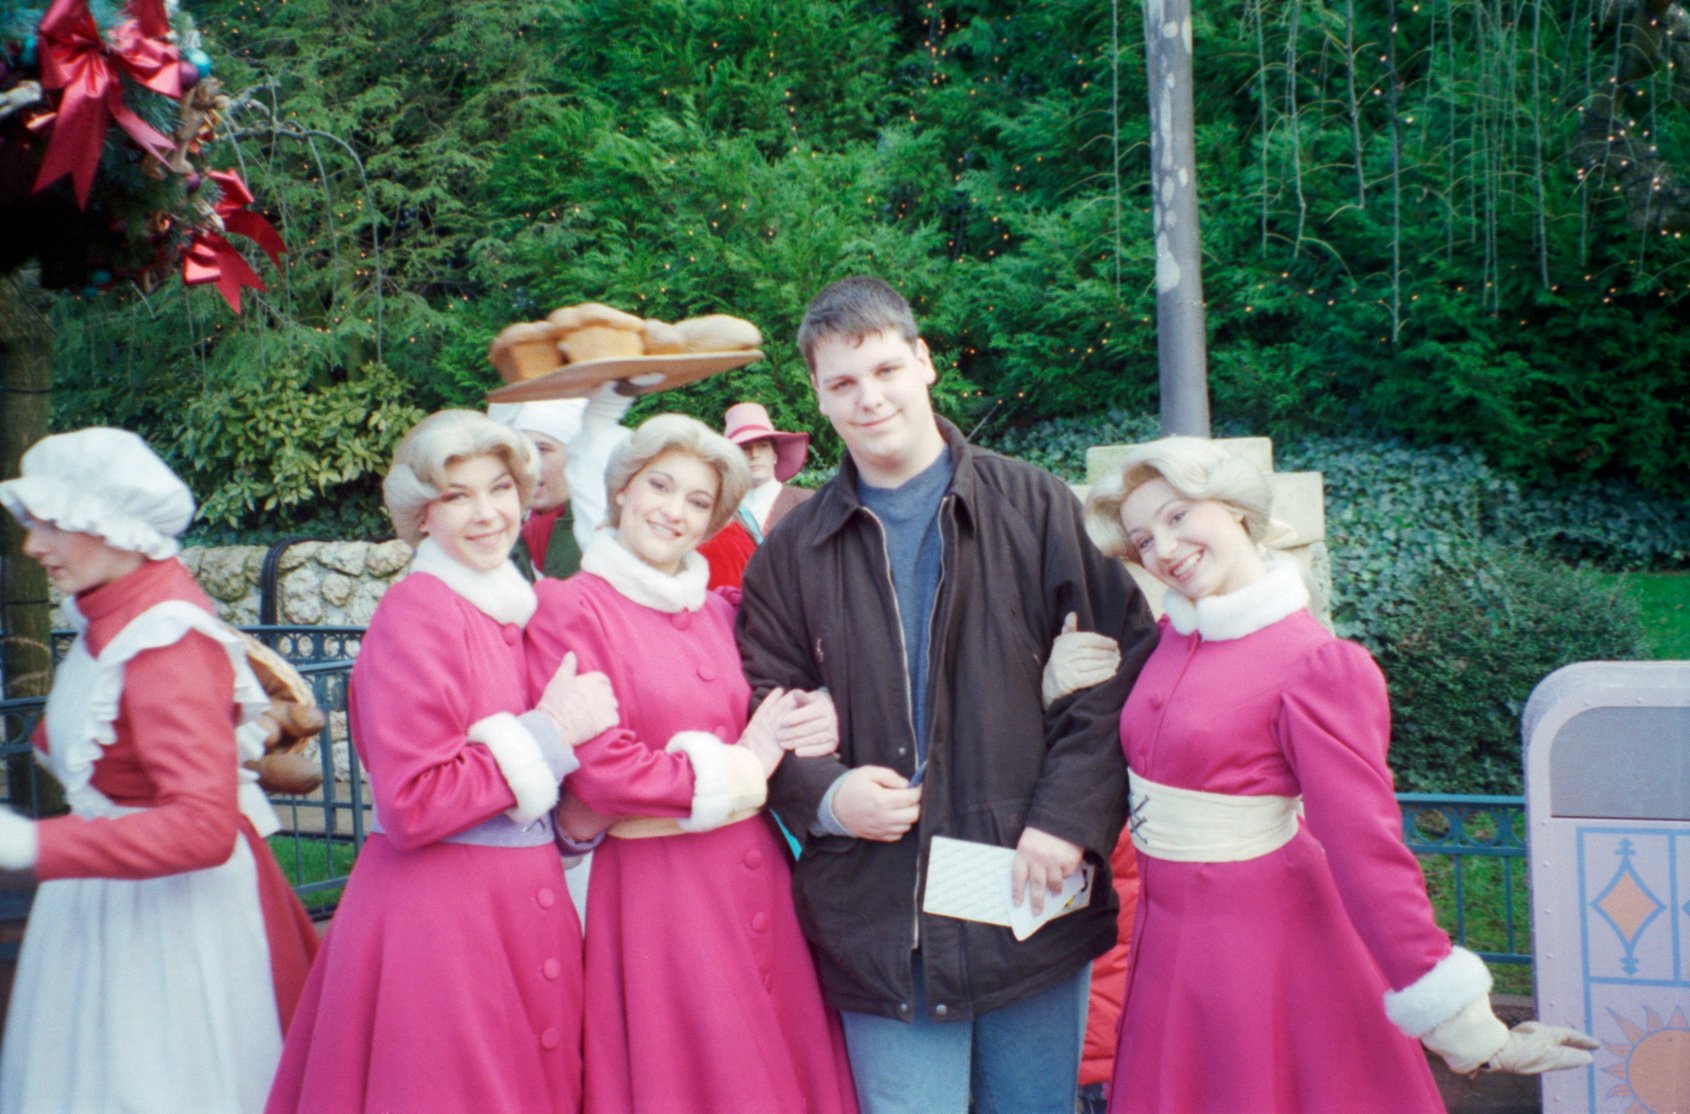 During Christmas Season 2002/2003 and 2003/2004 a small show was held in Belle's Village in Fantasyland. The show featured Belle, Gaston and a couple of the village people including The Bimbettes. After each show they would do Meet'n'Greets with guests.